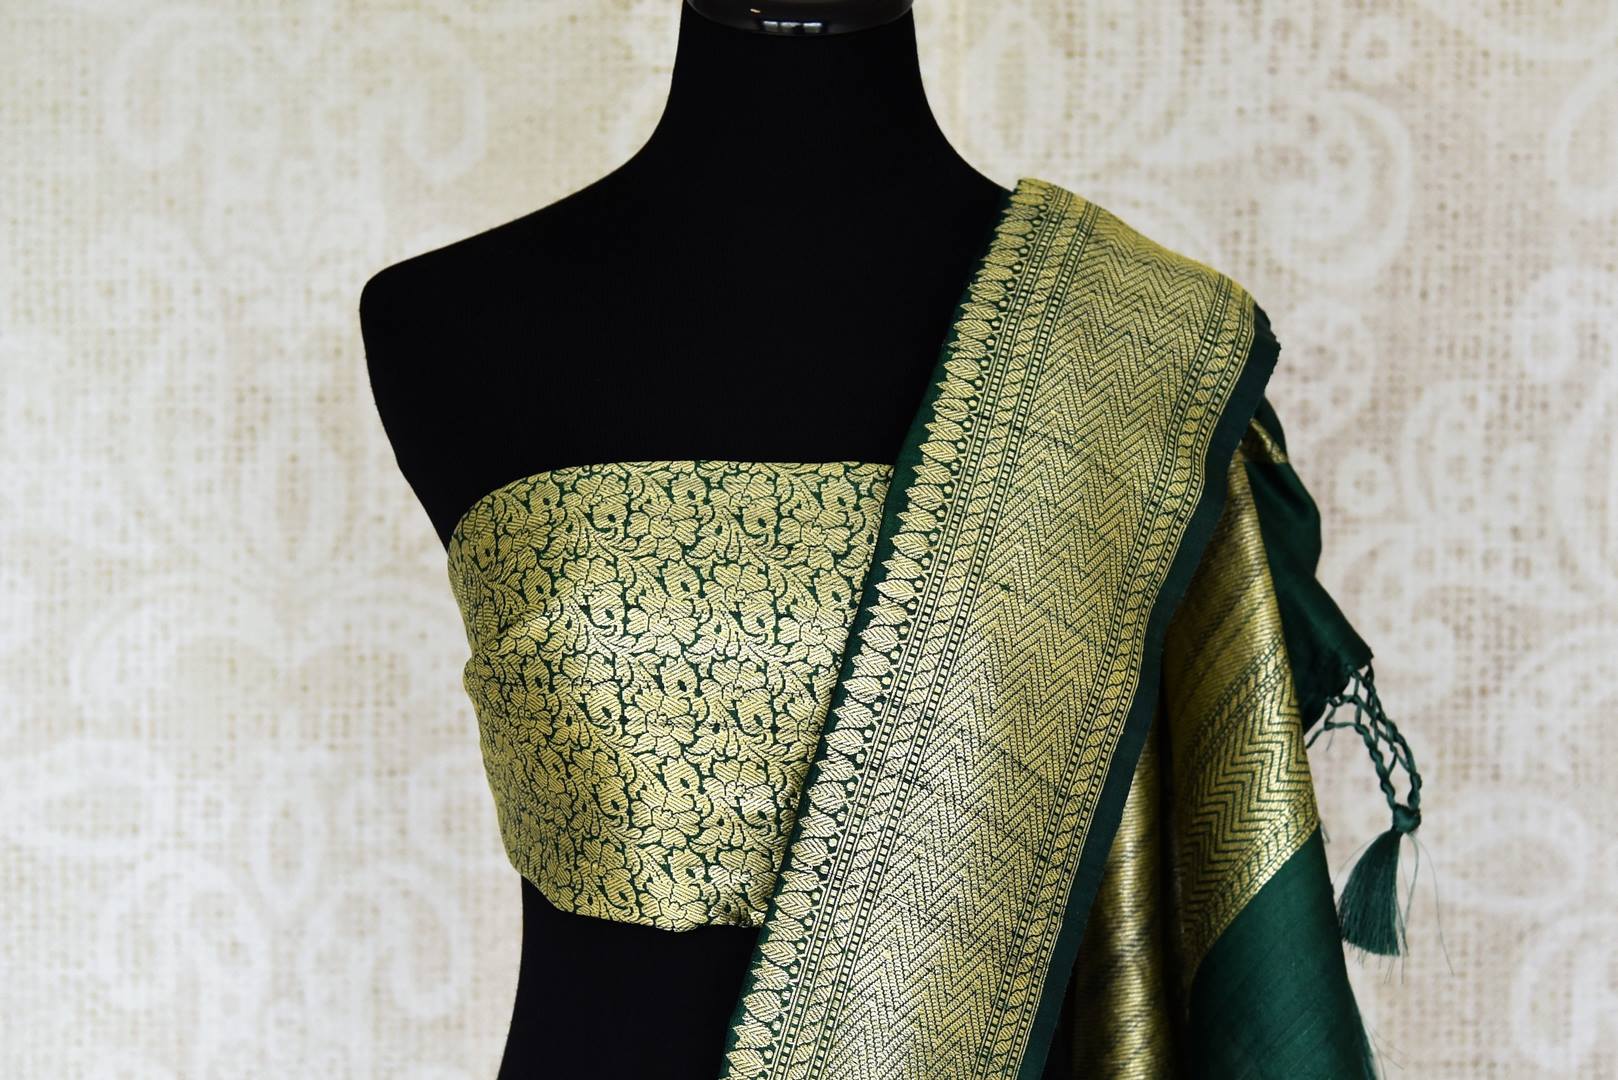 Buy bottle green khaddi Banarasi saree online in USA with minakari zari floral buta. Feel traditional on special occasions in beautiful Indian designer saris from Pure Elegance Indian fashion store in USA. Choose from a splendid variety of Banarasi sarees, pure handwoven saris. Buy online.-blouse pallu